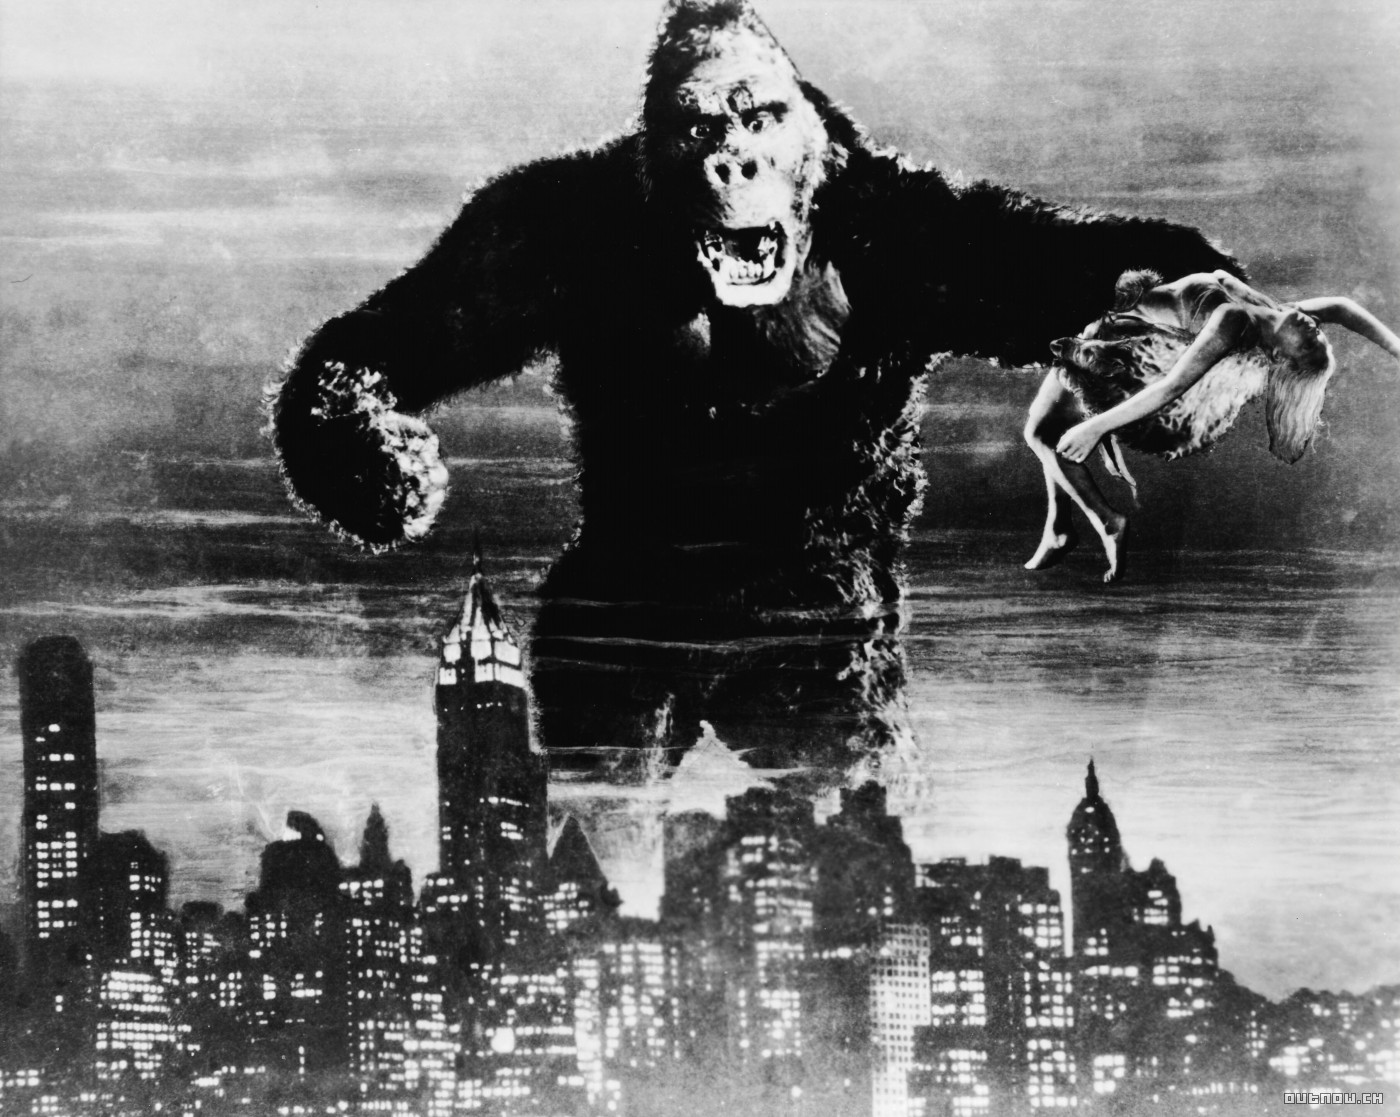 King Kong from 1933